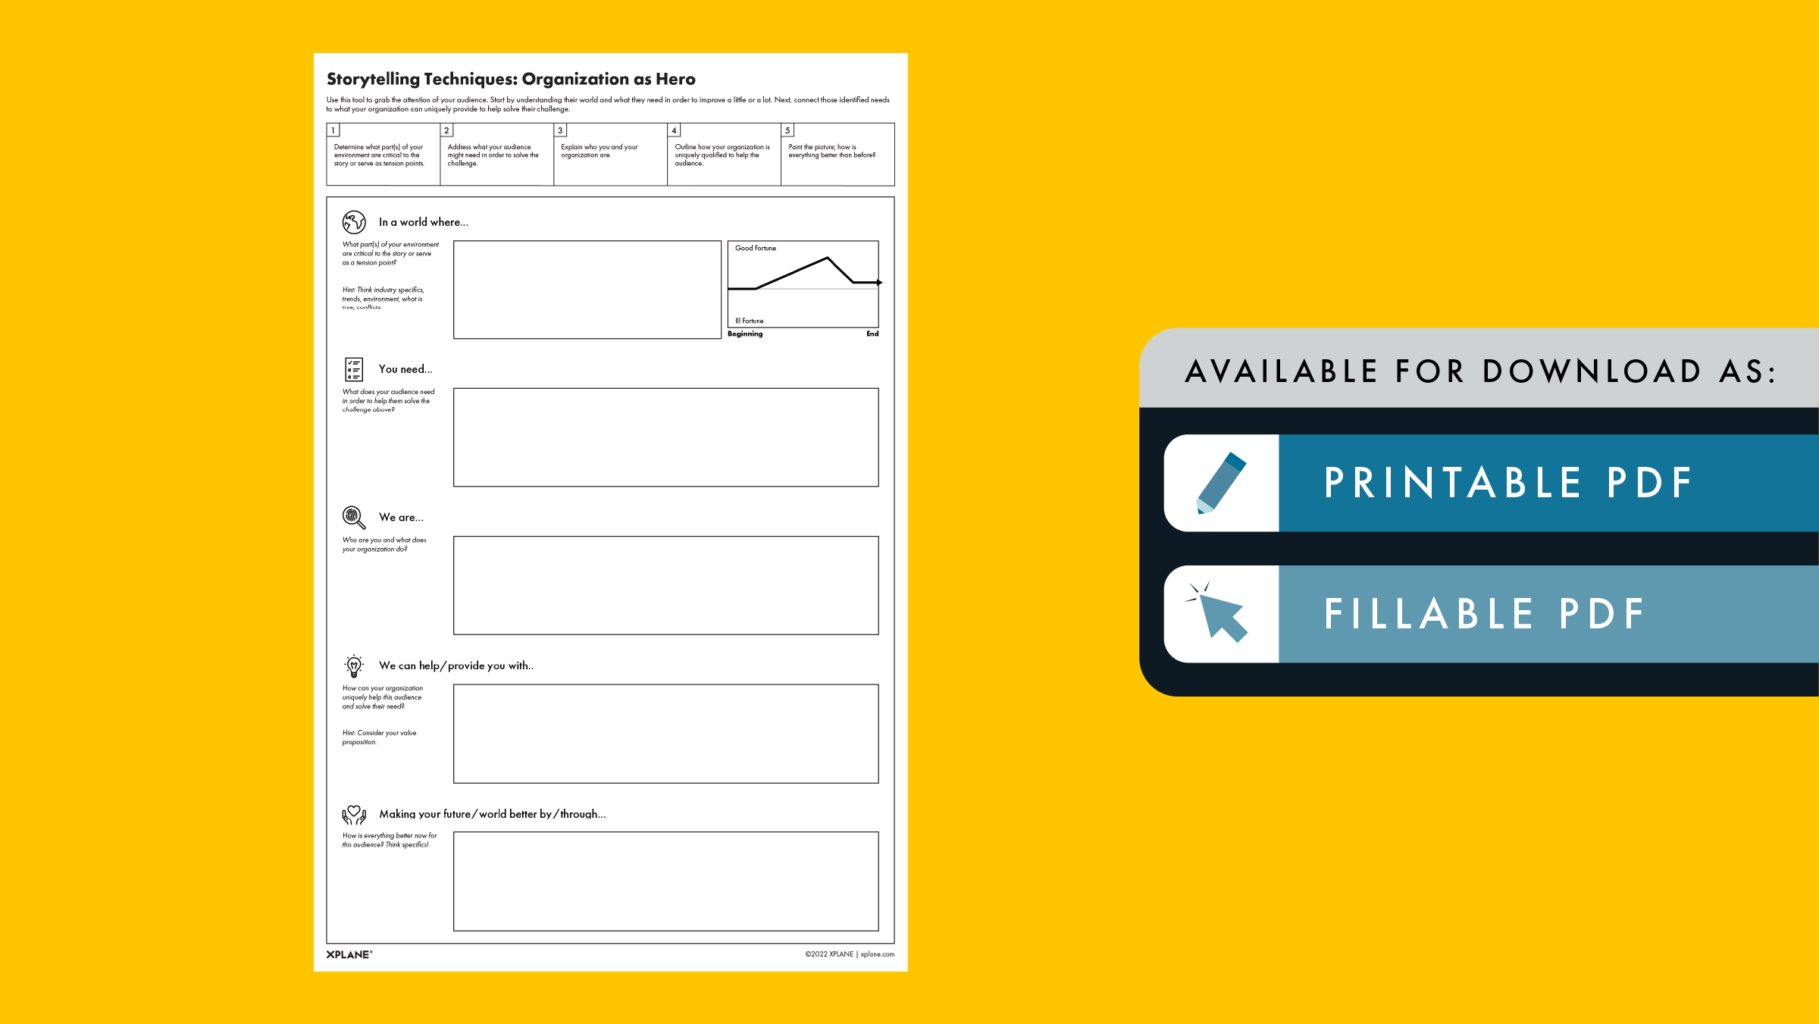 Organization as Hero worksheet against a yellow background. Two tabs under the header "AVAILABLE FOR DOWNLOAD AS" indicate available file types available.